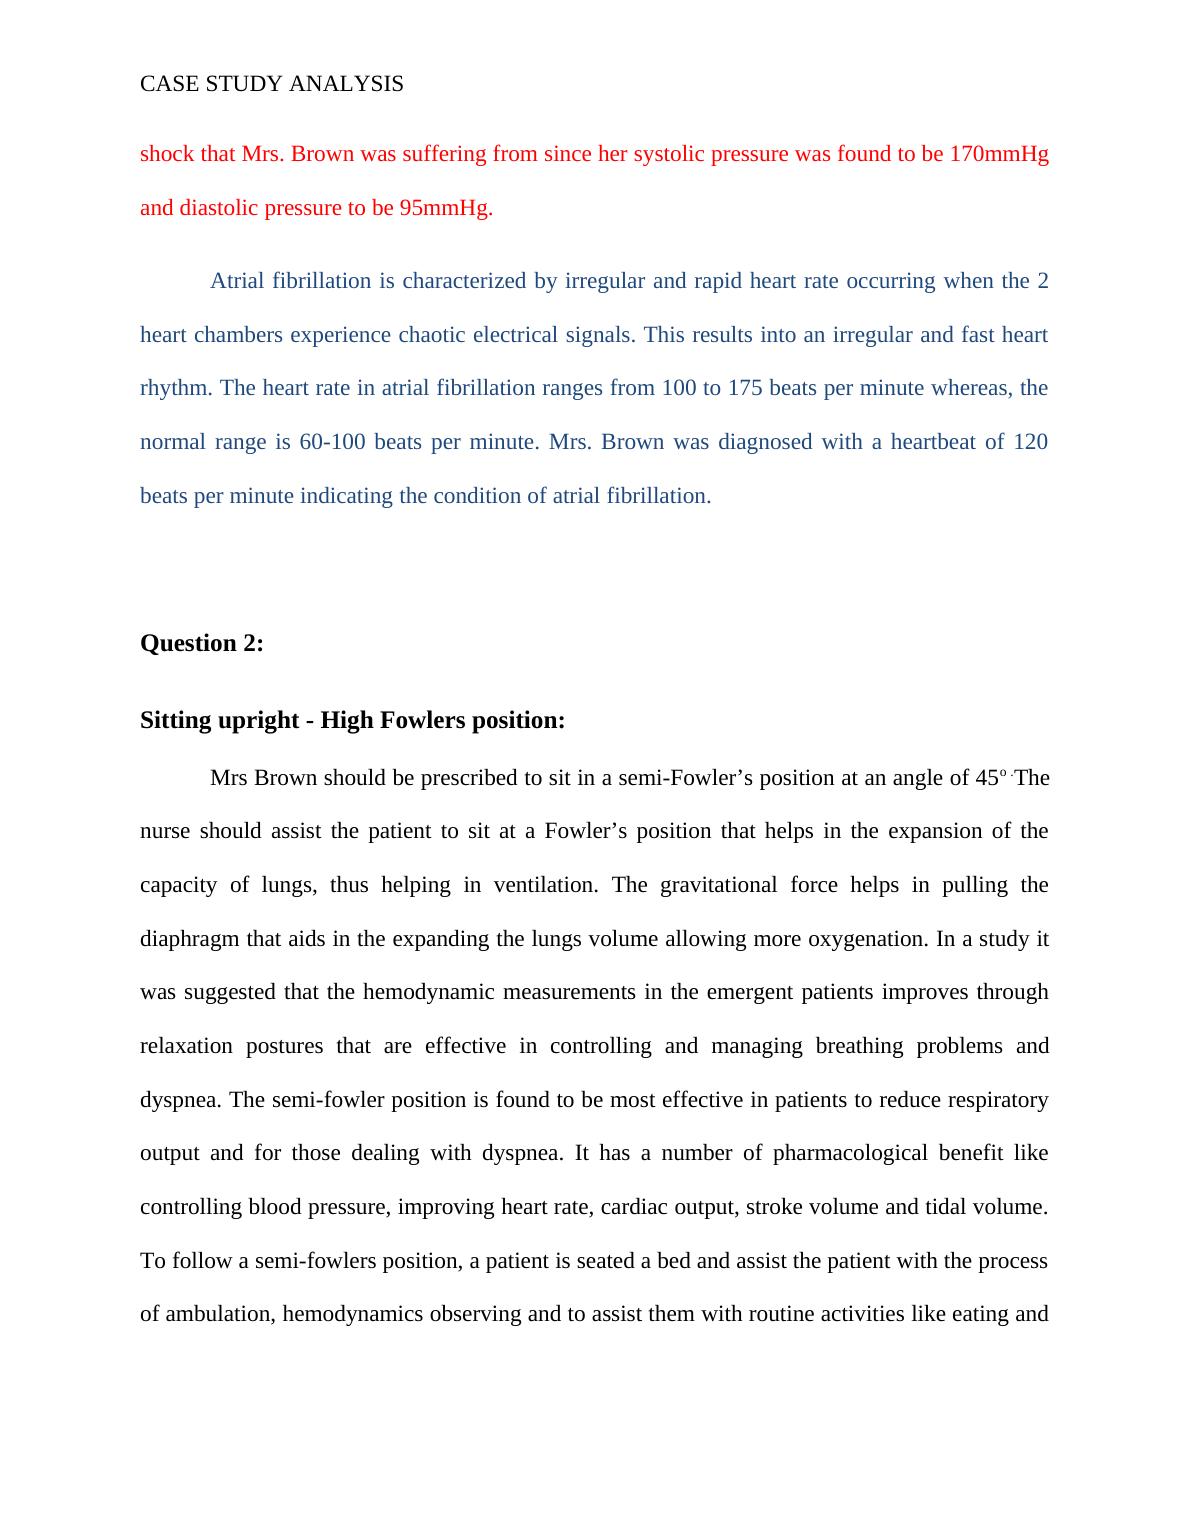 Assignment on case study Analysis | Report_4